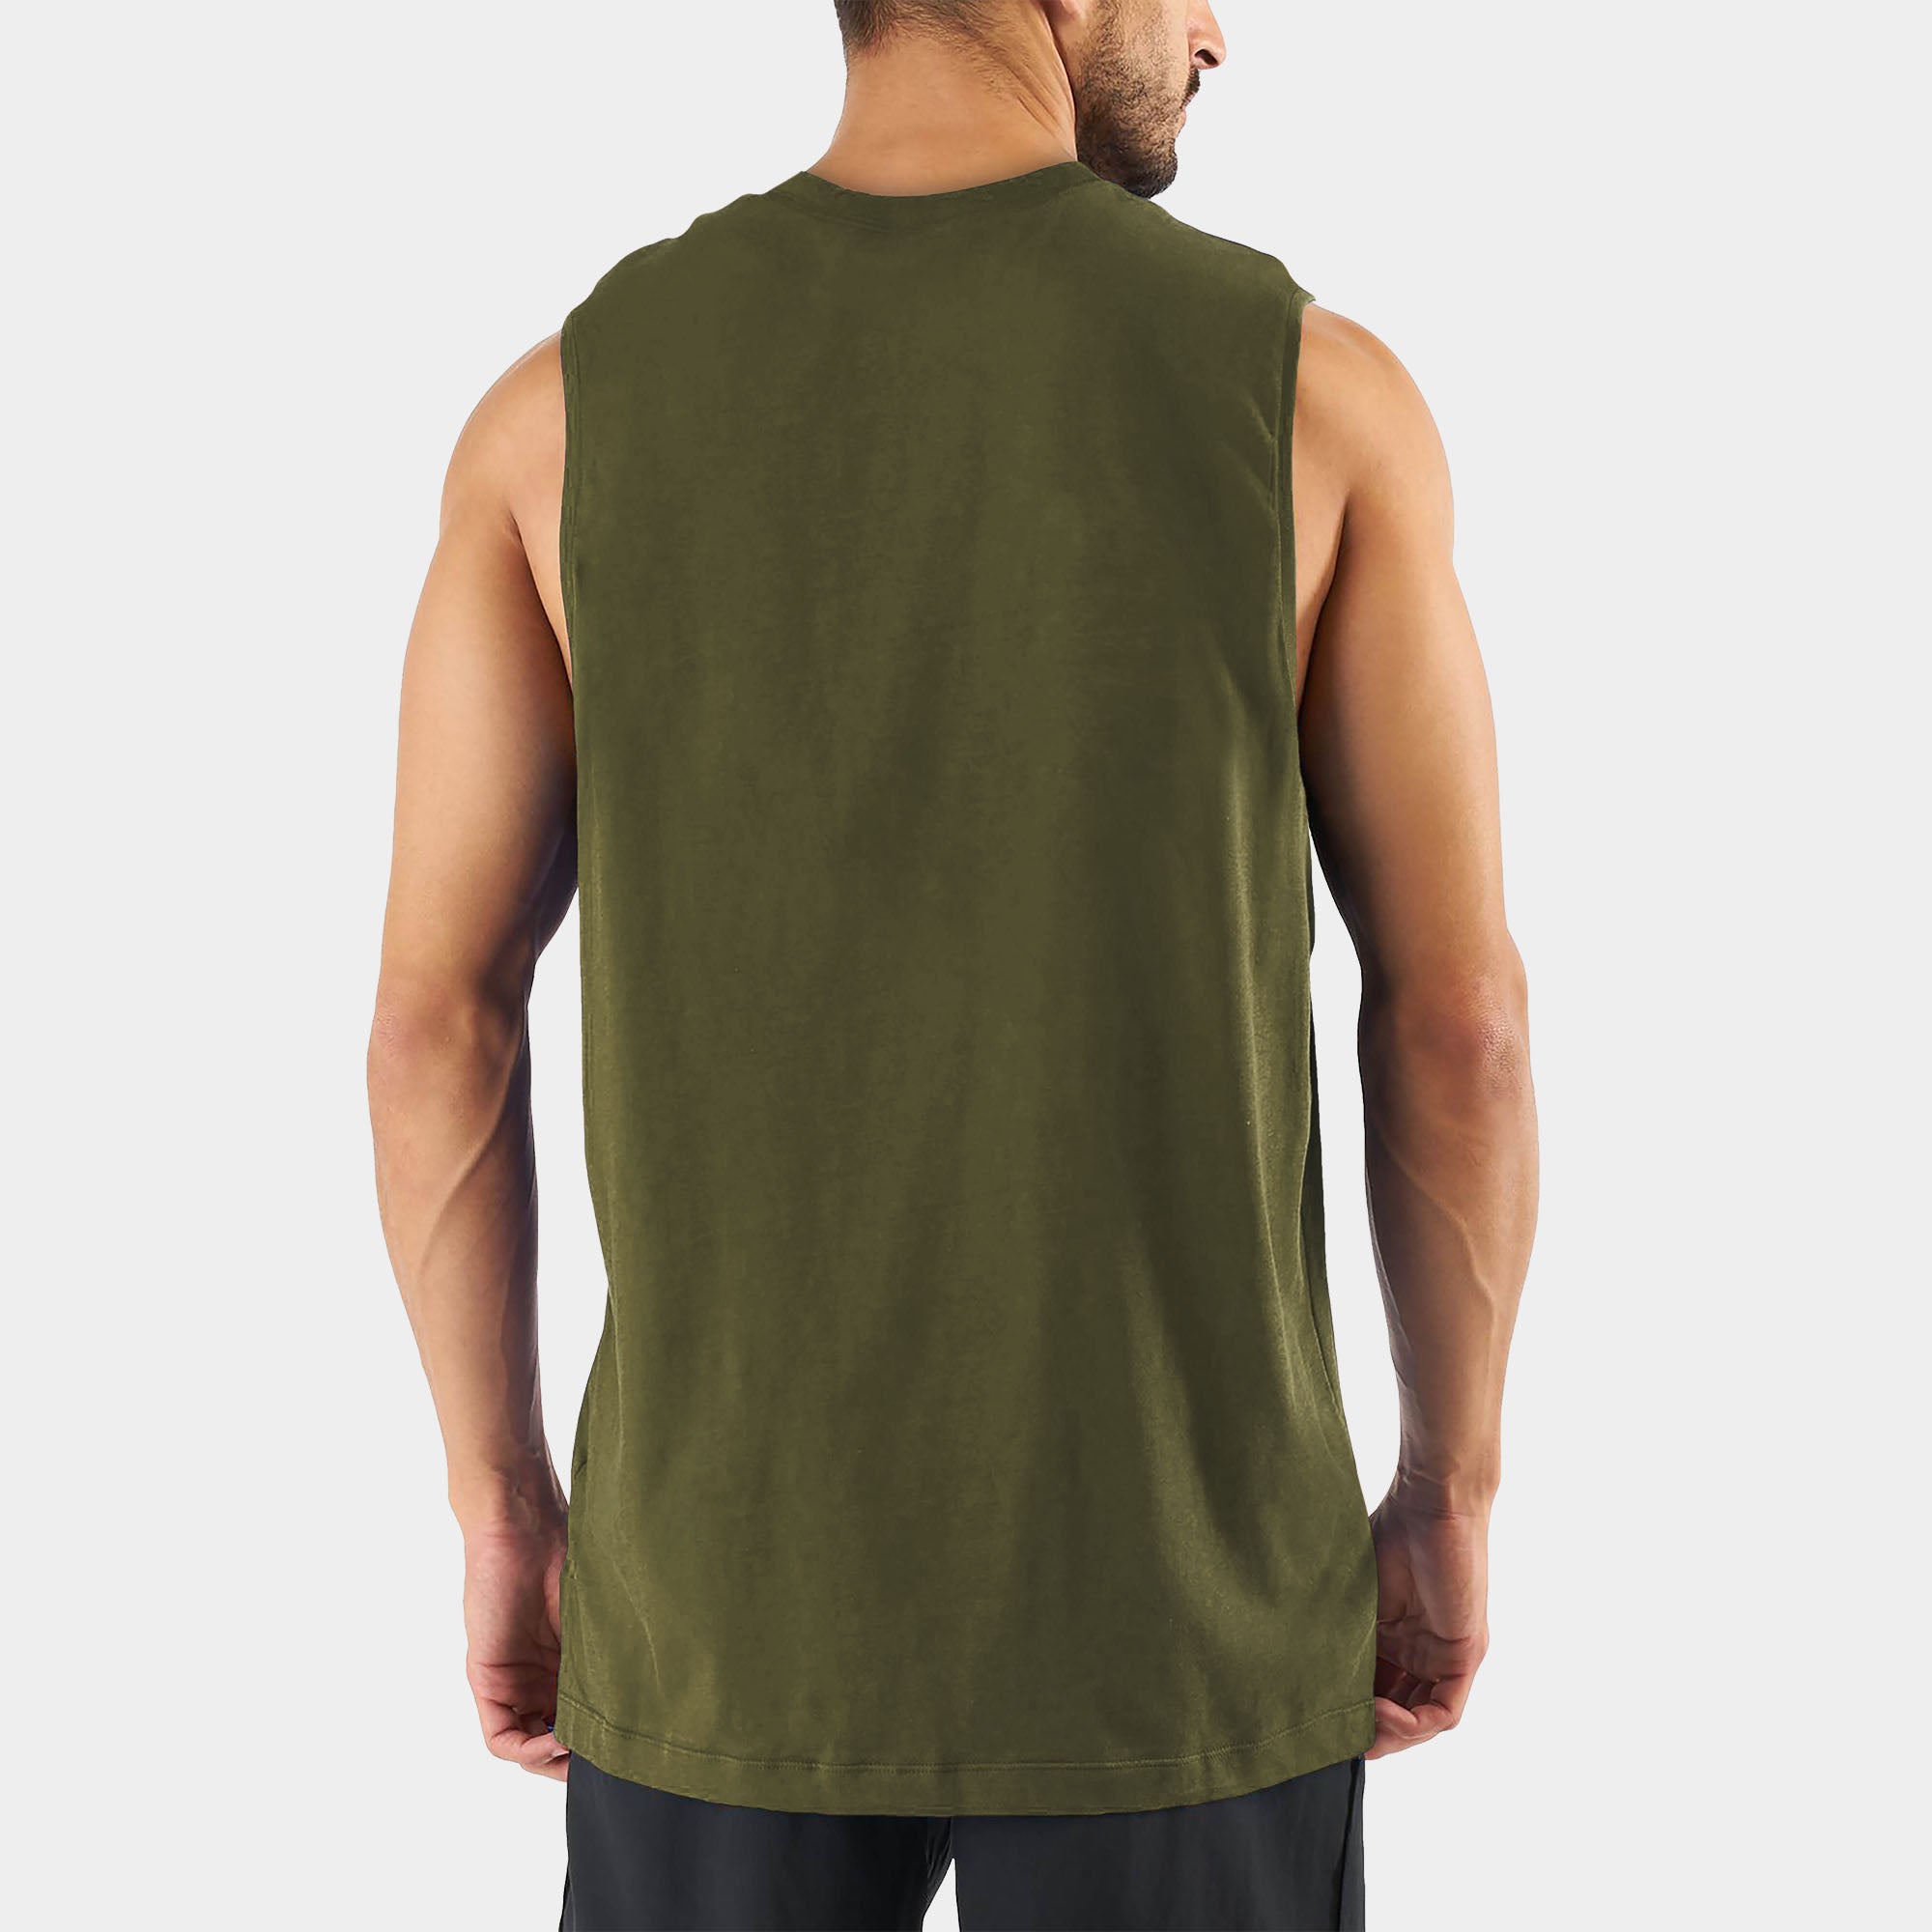 muscle_tank top_for_mens_sleeveless jersey_t shirt_jays_camiseta sin mangas_muscular_stafford shirts_youth_3xl_thermal tops_club dress_big and tall_tutle necks_shurt_muscle_topes_peterbilt_heavyweight_heavy weight _duty_ready_heather gray_cotton_roomie shirt_gym workout_without undershirt_black sando_cutoff sports_vivid color_colour_Militarygreen